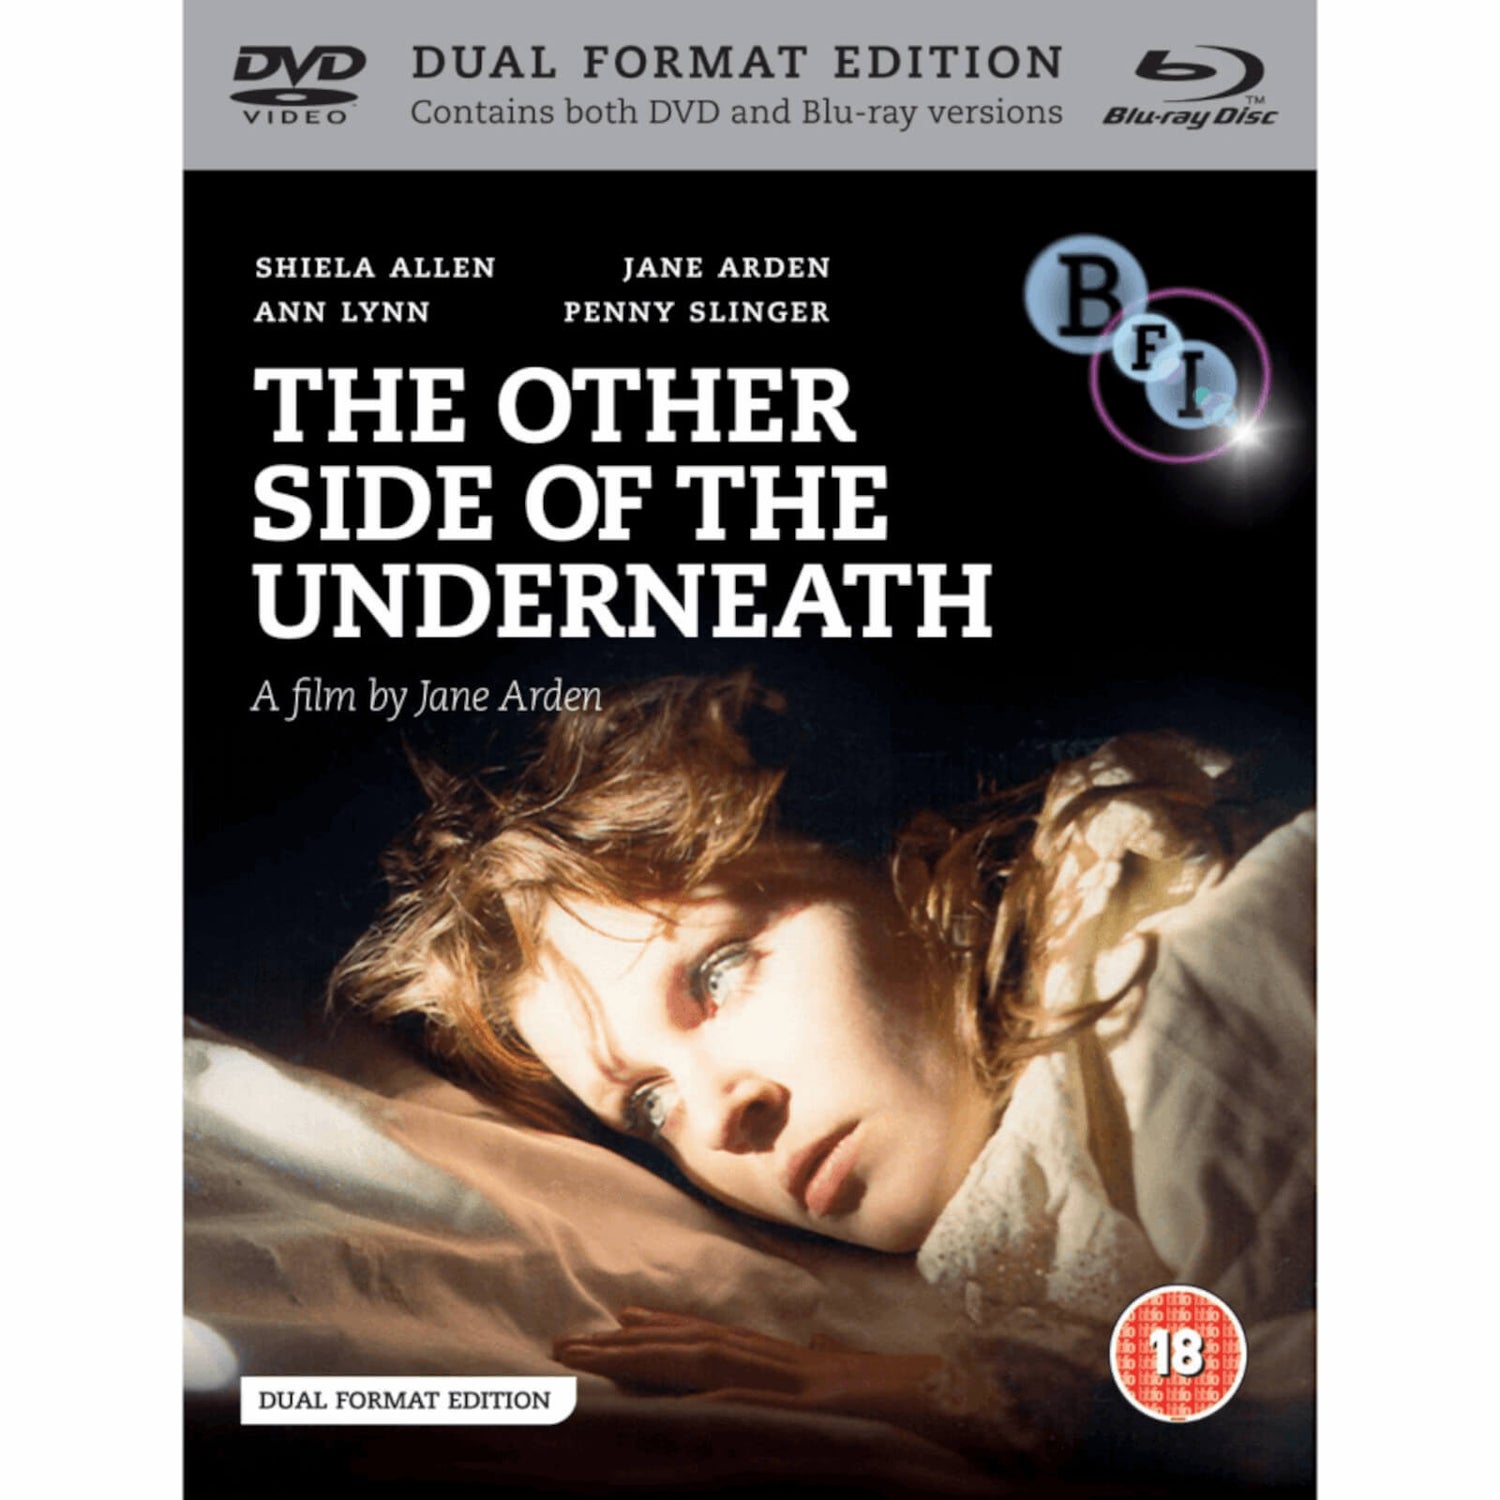 The Other Side of the Underneath (Blu-Ray and DVD)